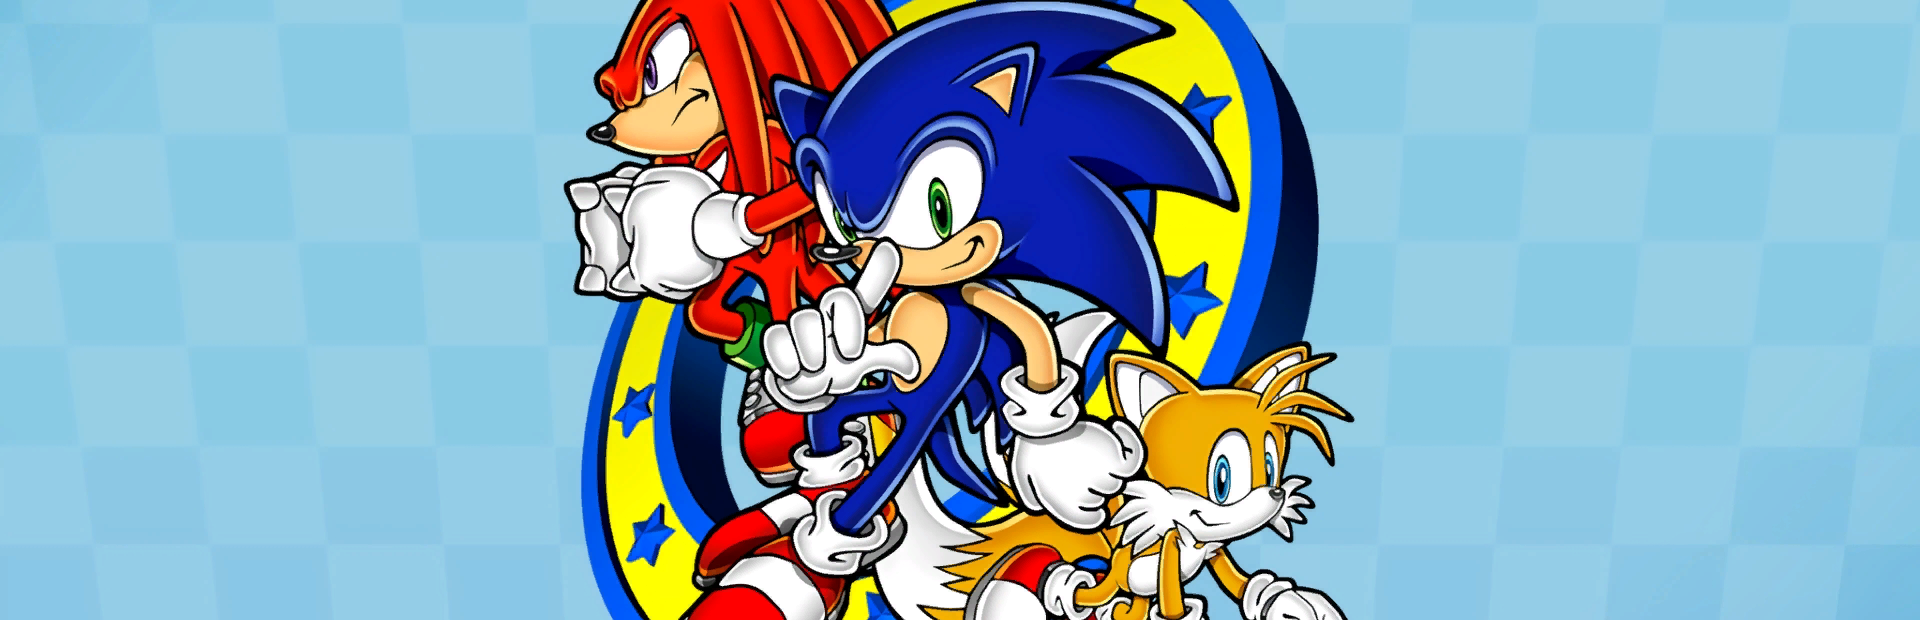 Sonic Classic Collection - SteamGridDB